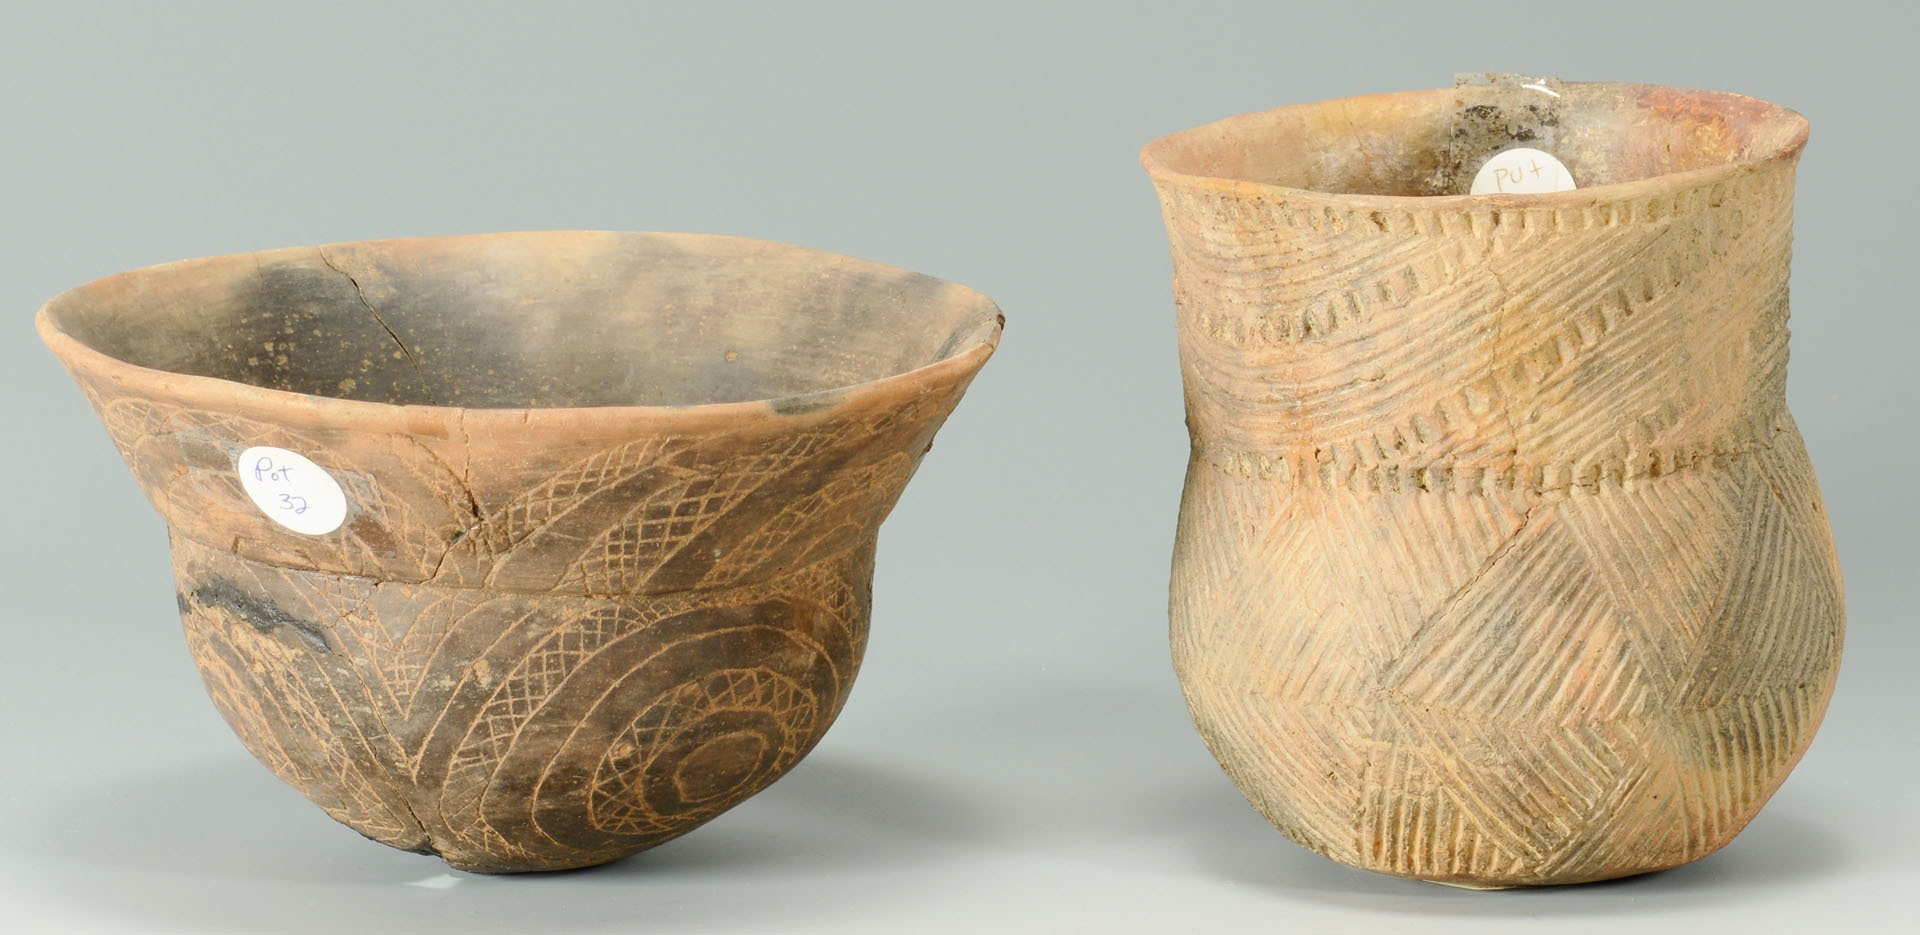 Lot 400: 2 Caddo Incised and Engraved Vessels, Jar and Bowl